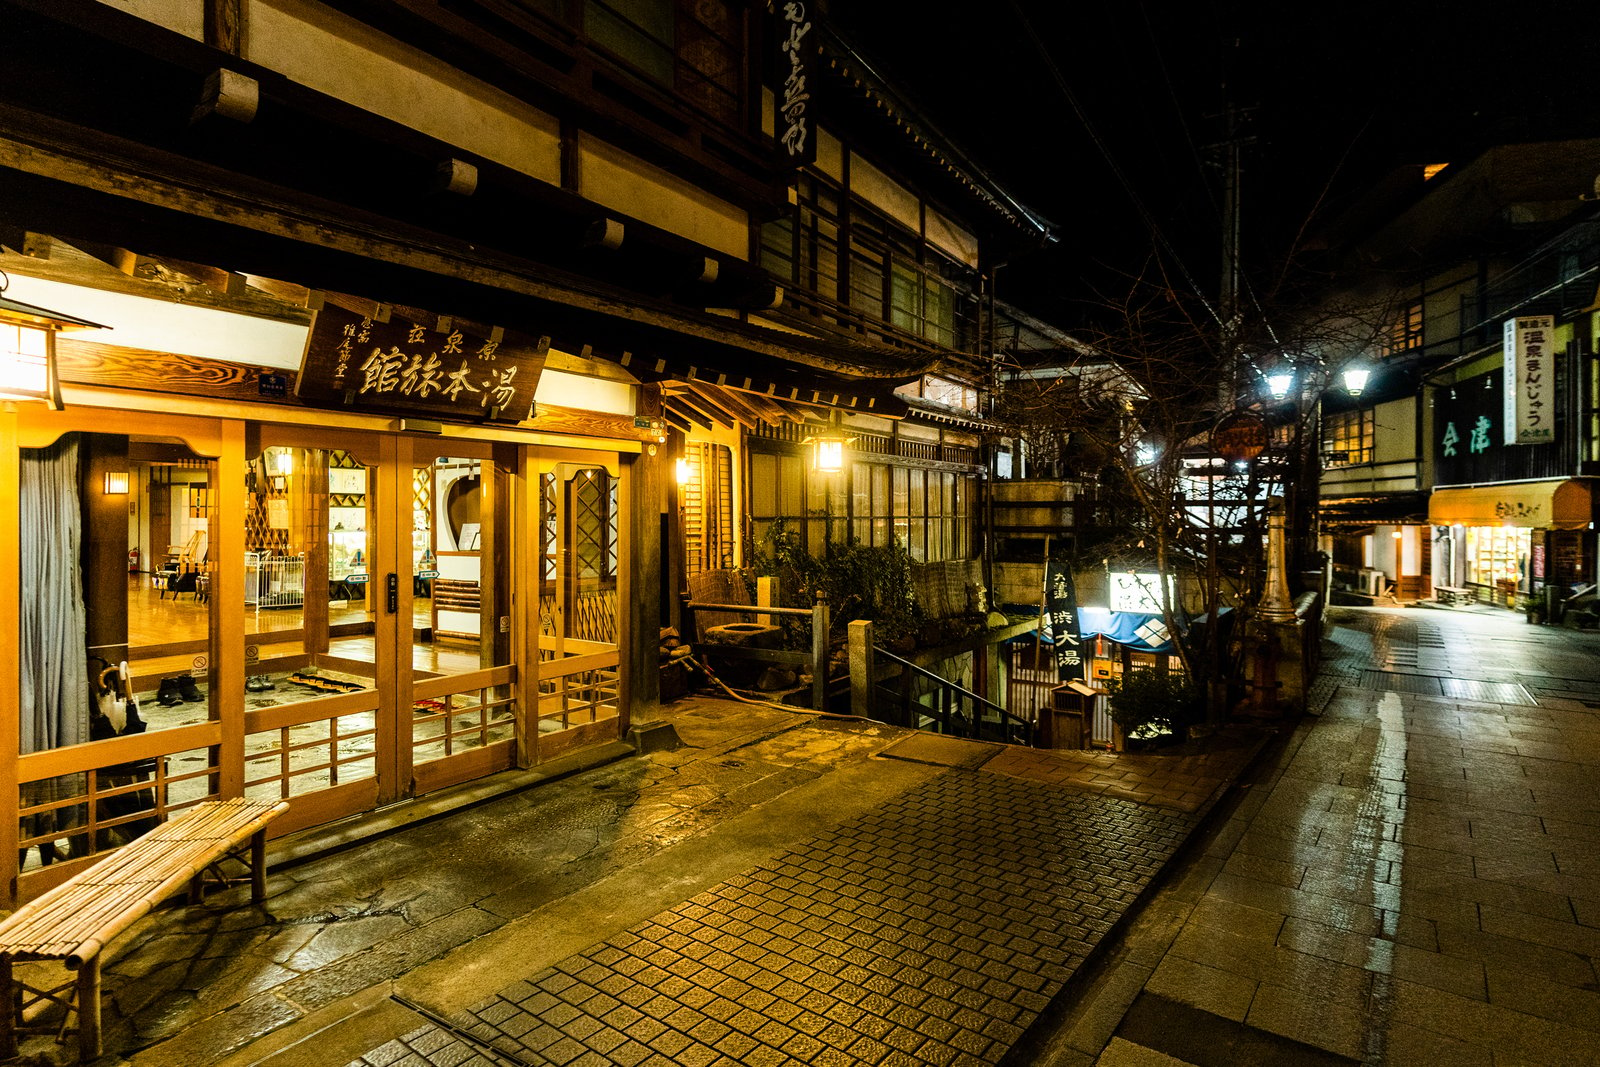 Where to Stay in Nagano